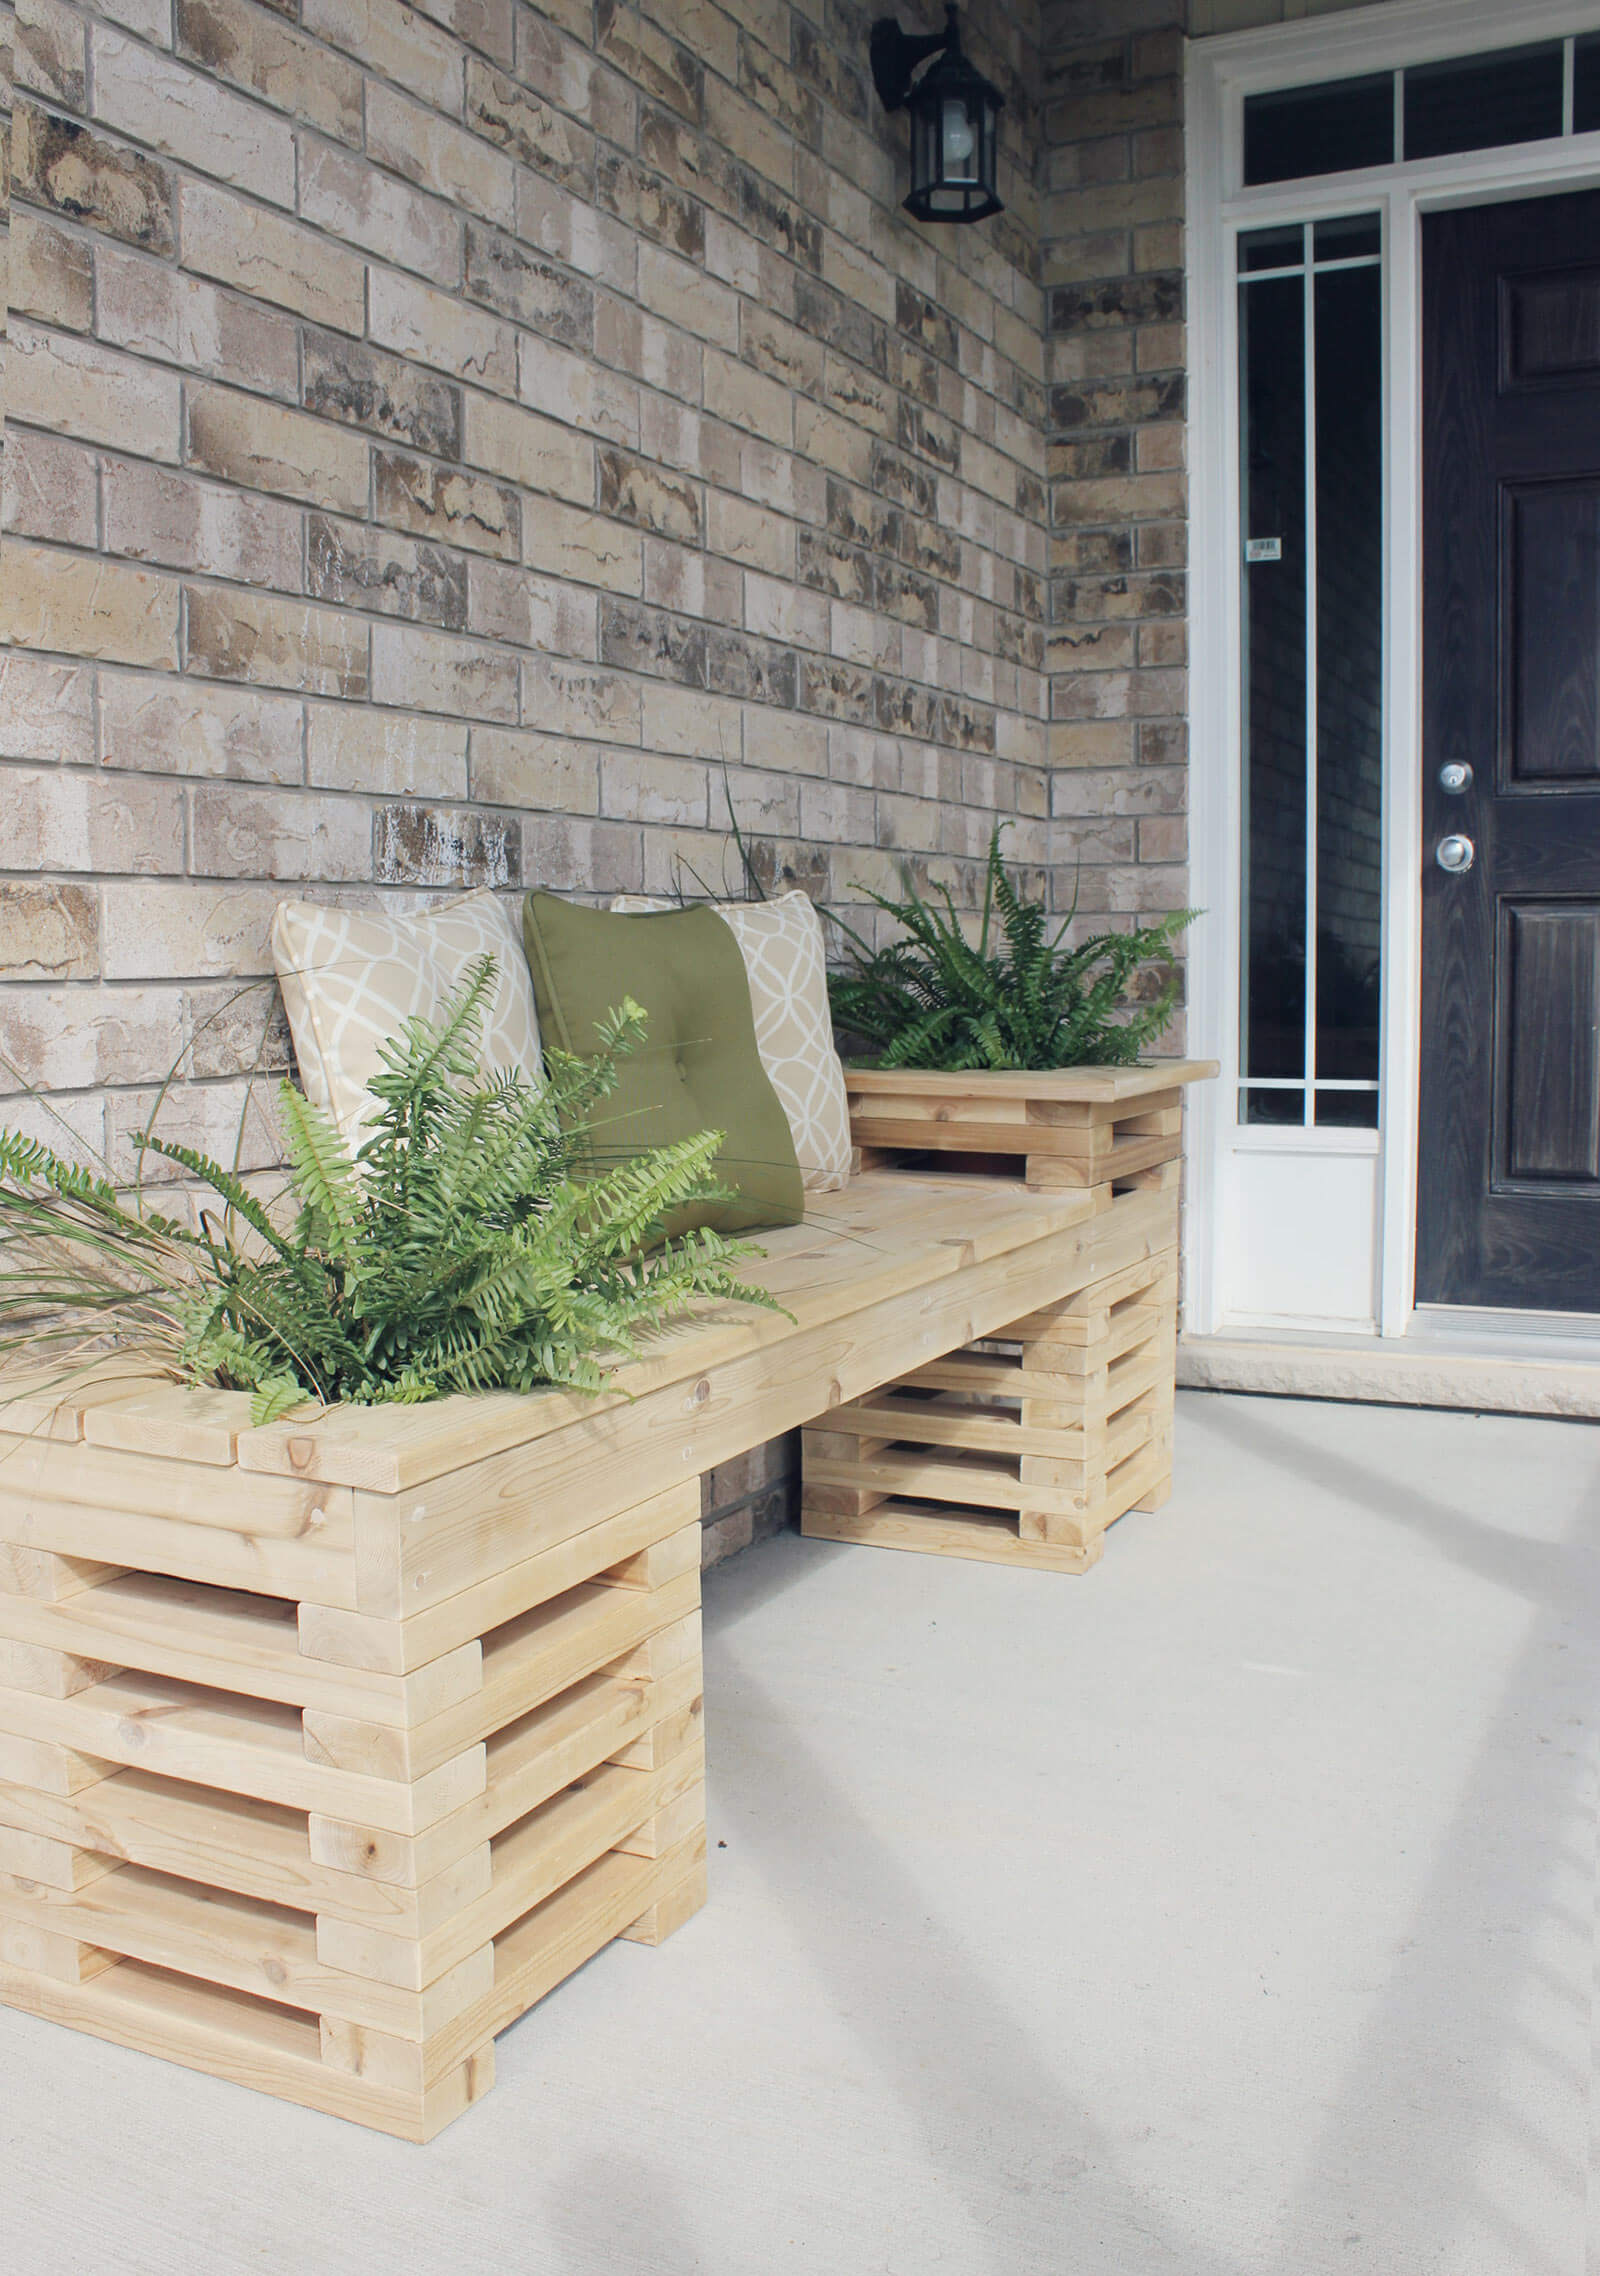 15 Lovely DIY Patio Bench Projects You Need To Make Before Spring